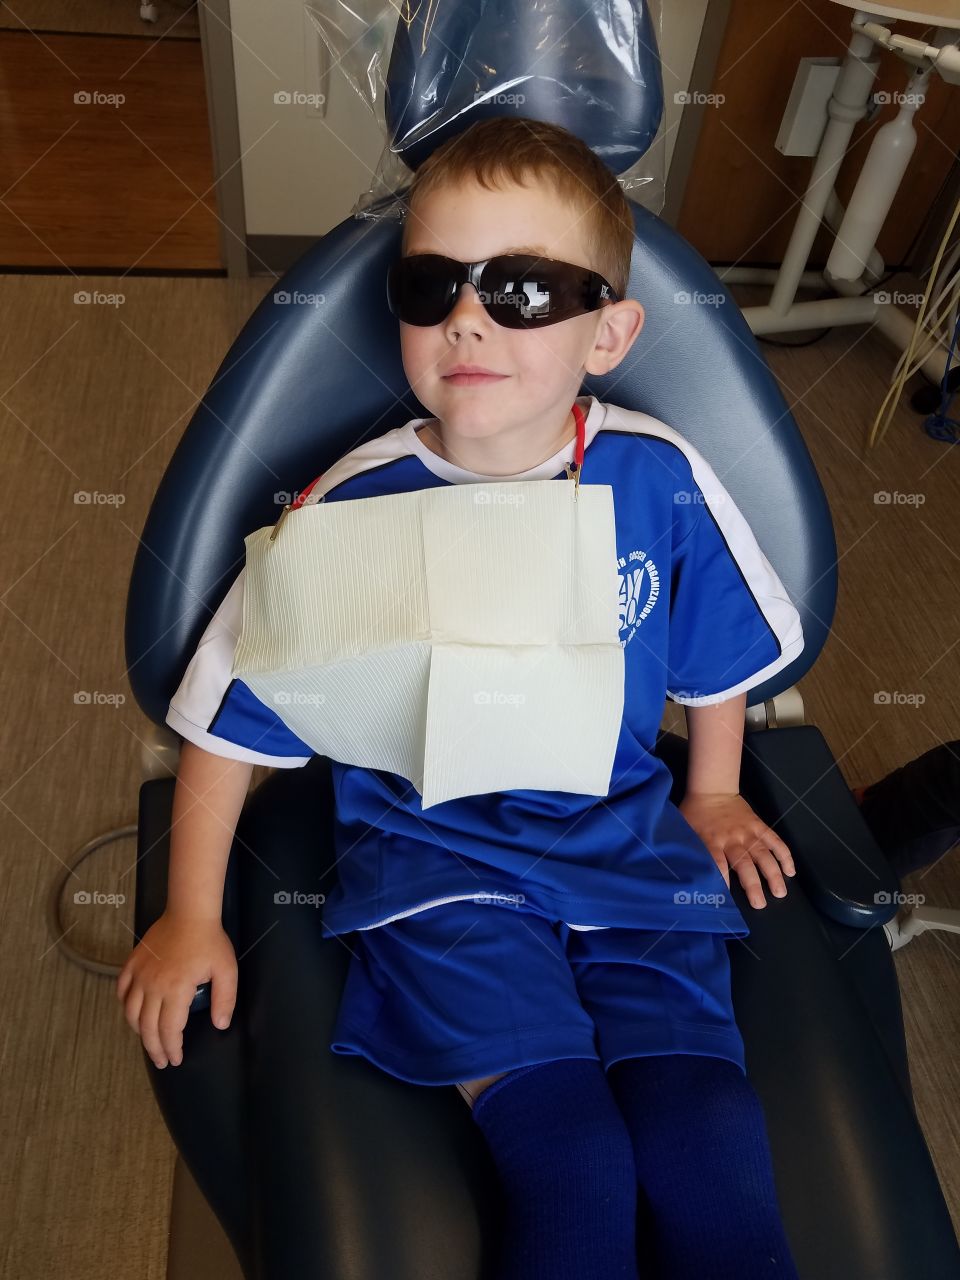 Blonde boy, in blue soccer uniform and dark glasses, sits smiling in dentist chair.